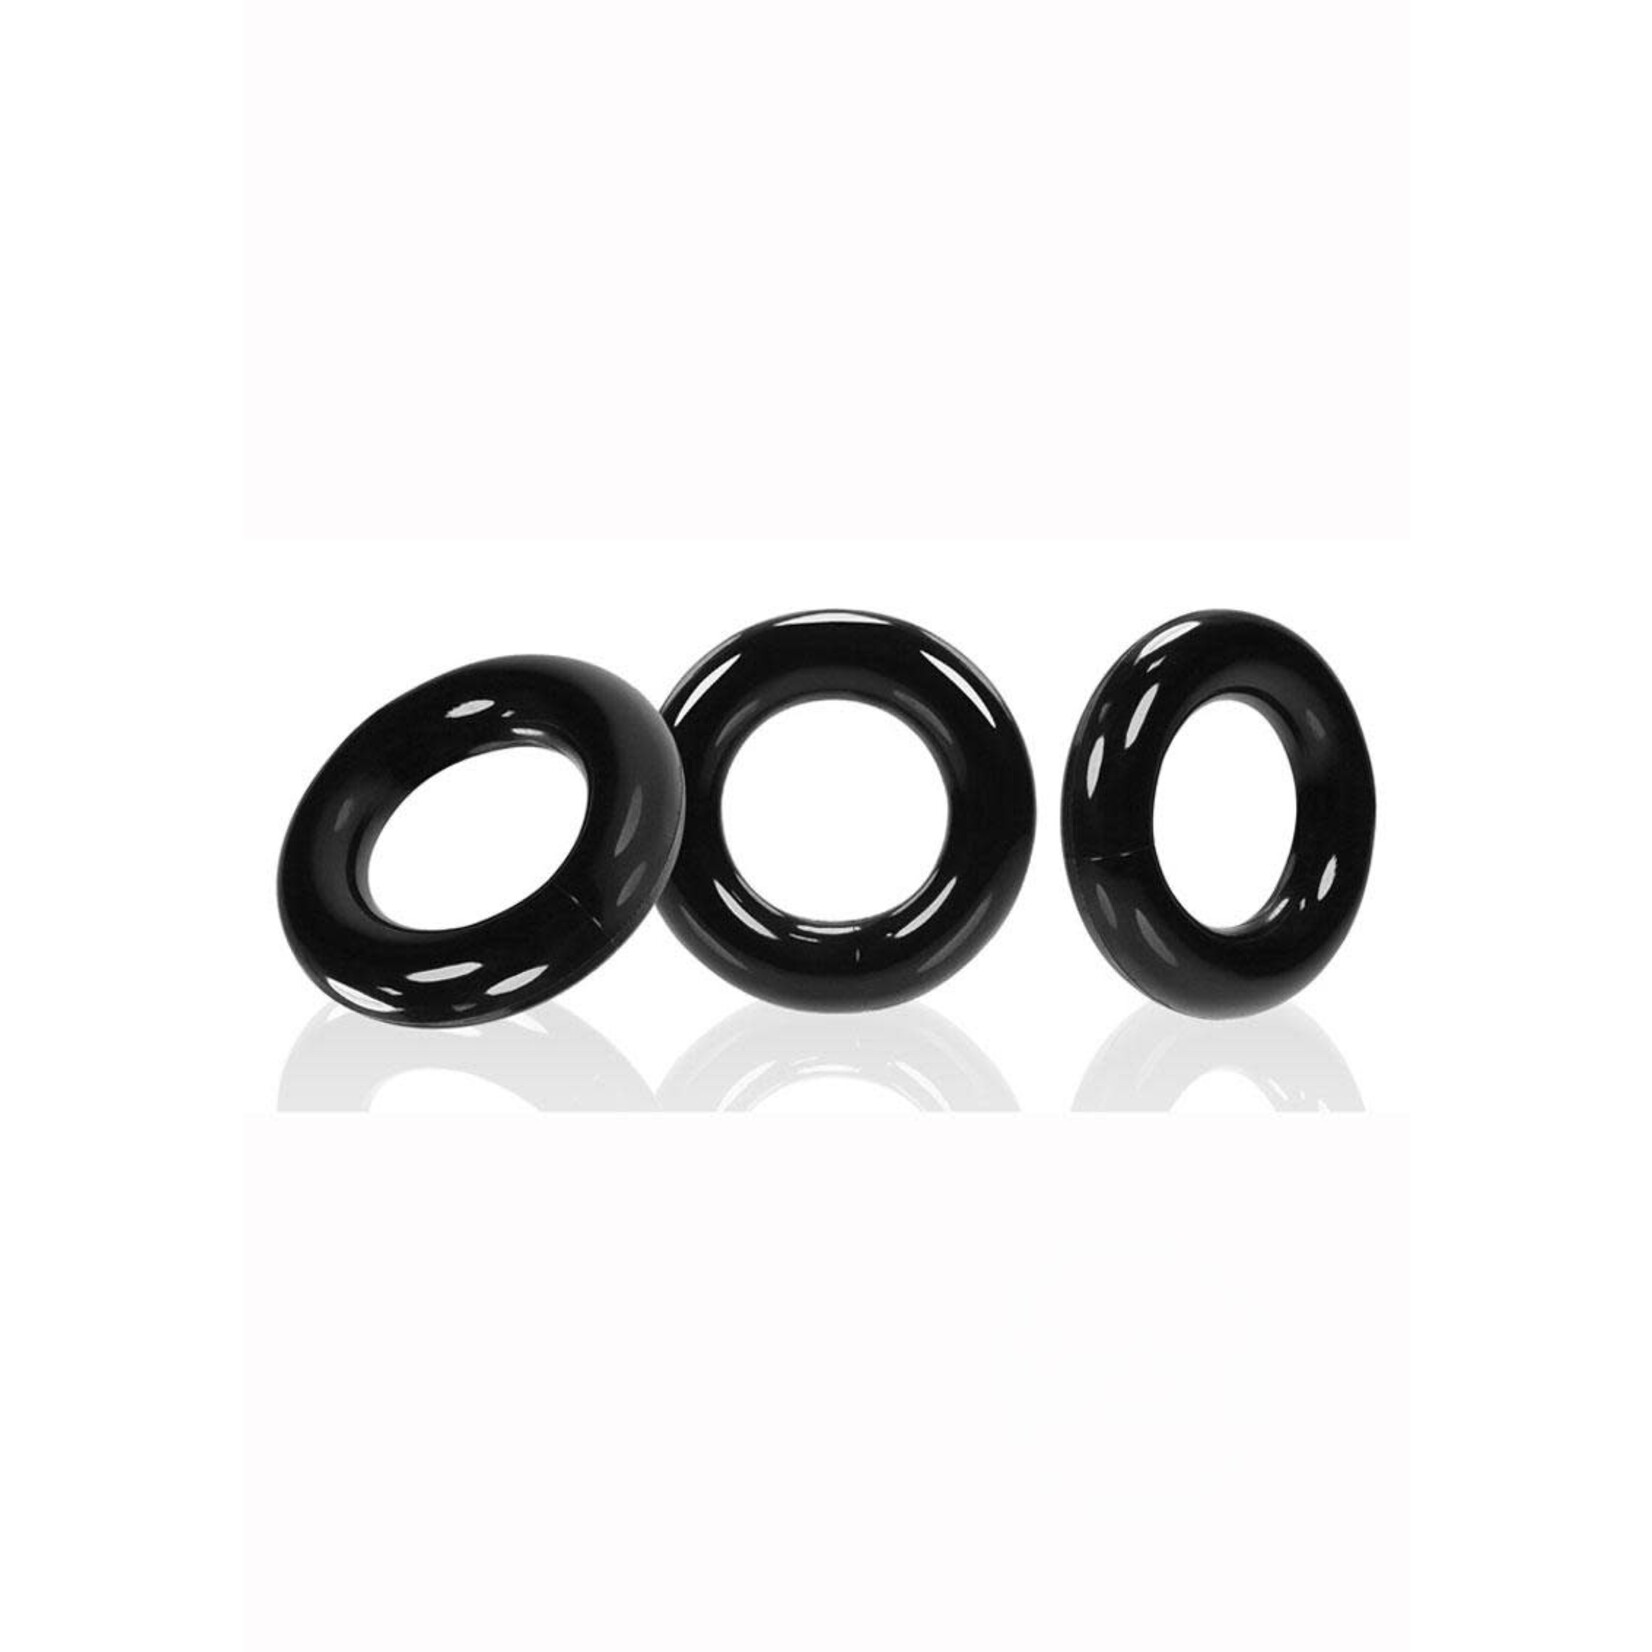 Oxballs Willy Rings Cock Ring (3 Pack) - Black